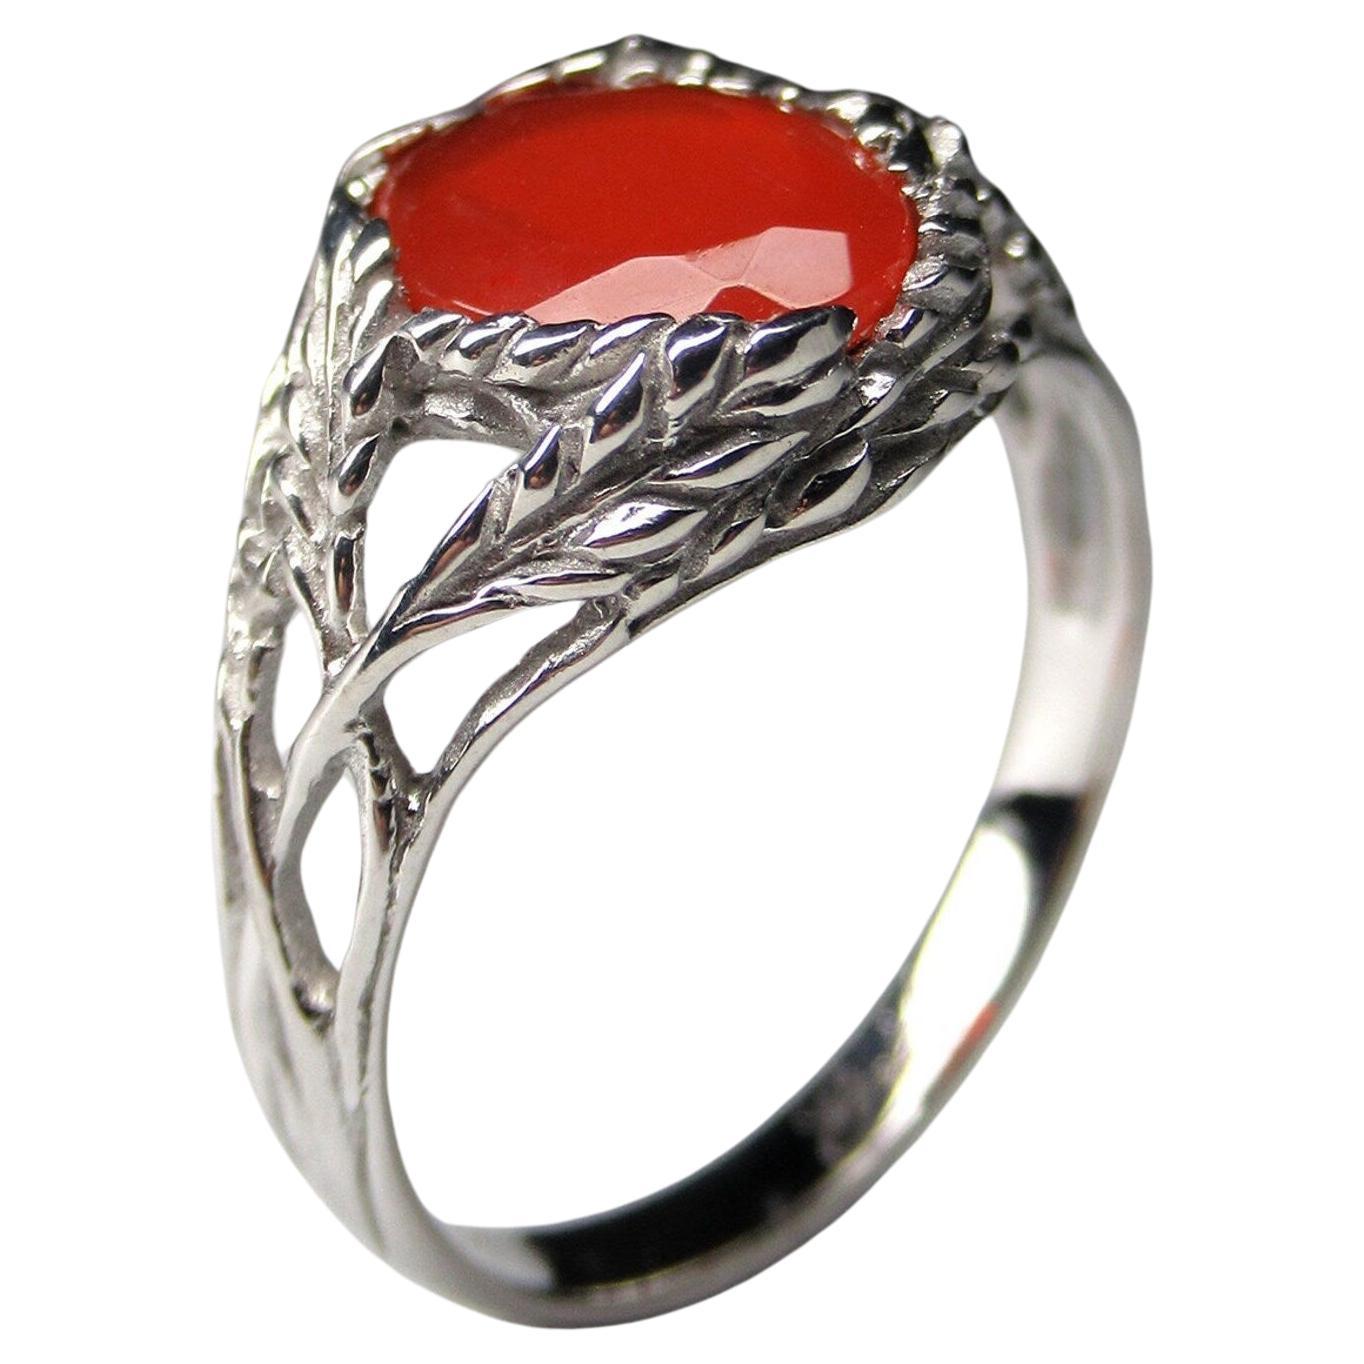 Fire Opal Silver Ring Red Mexican Gemstone Fine Art Nouveau Style Unisex Jewelry For Sale